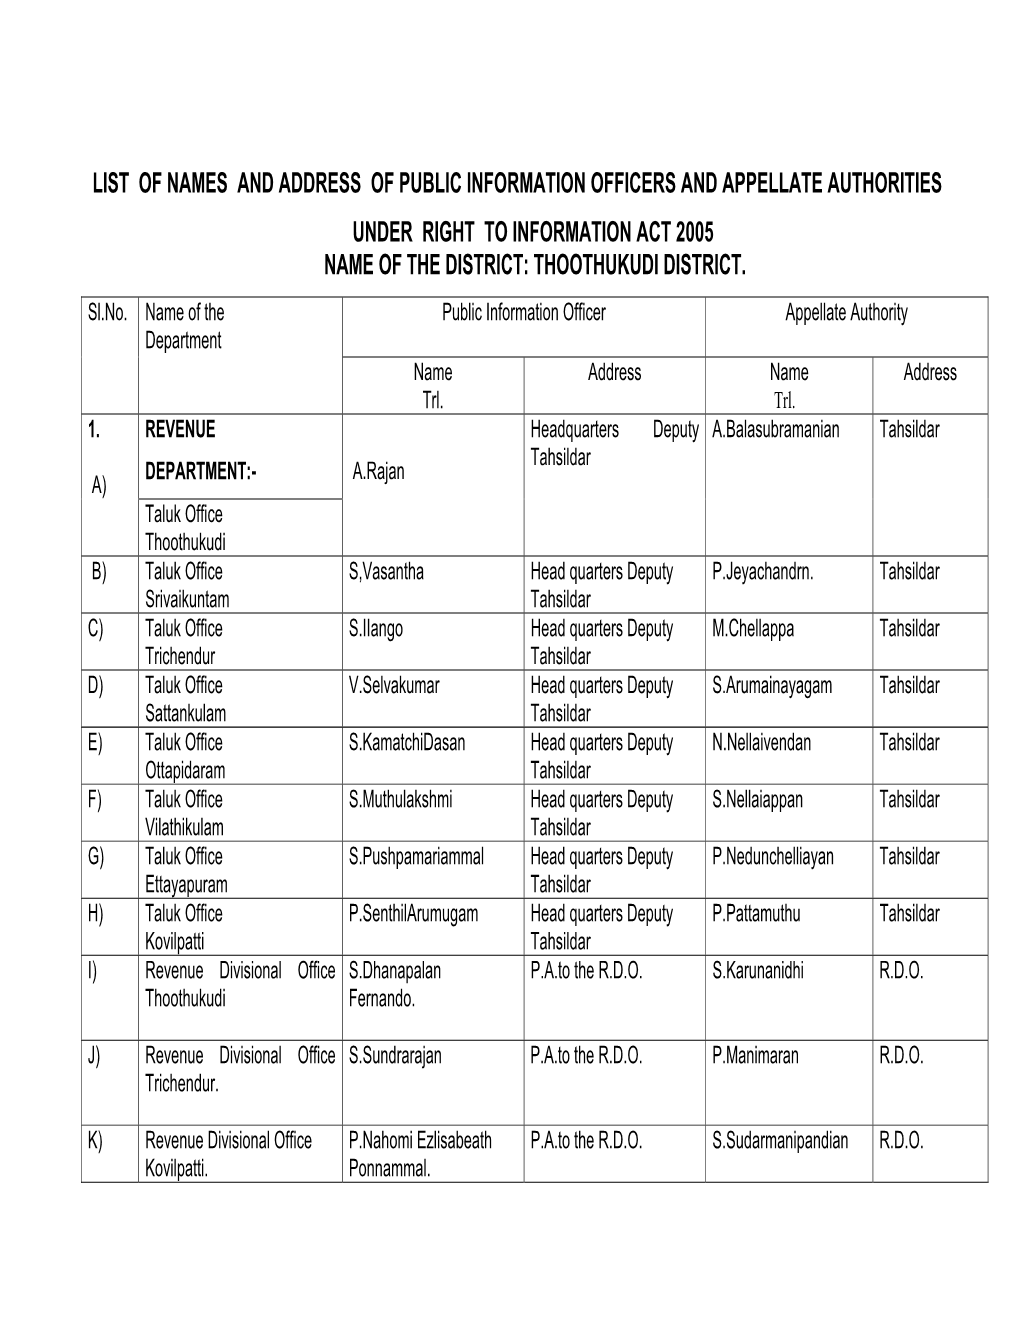 List of Names and Address of Public Information Officers and Appellate Authorities Under Right to Information Act 2005 Name of the District: Thoothukudi District